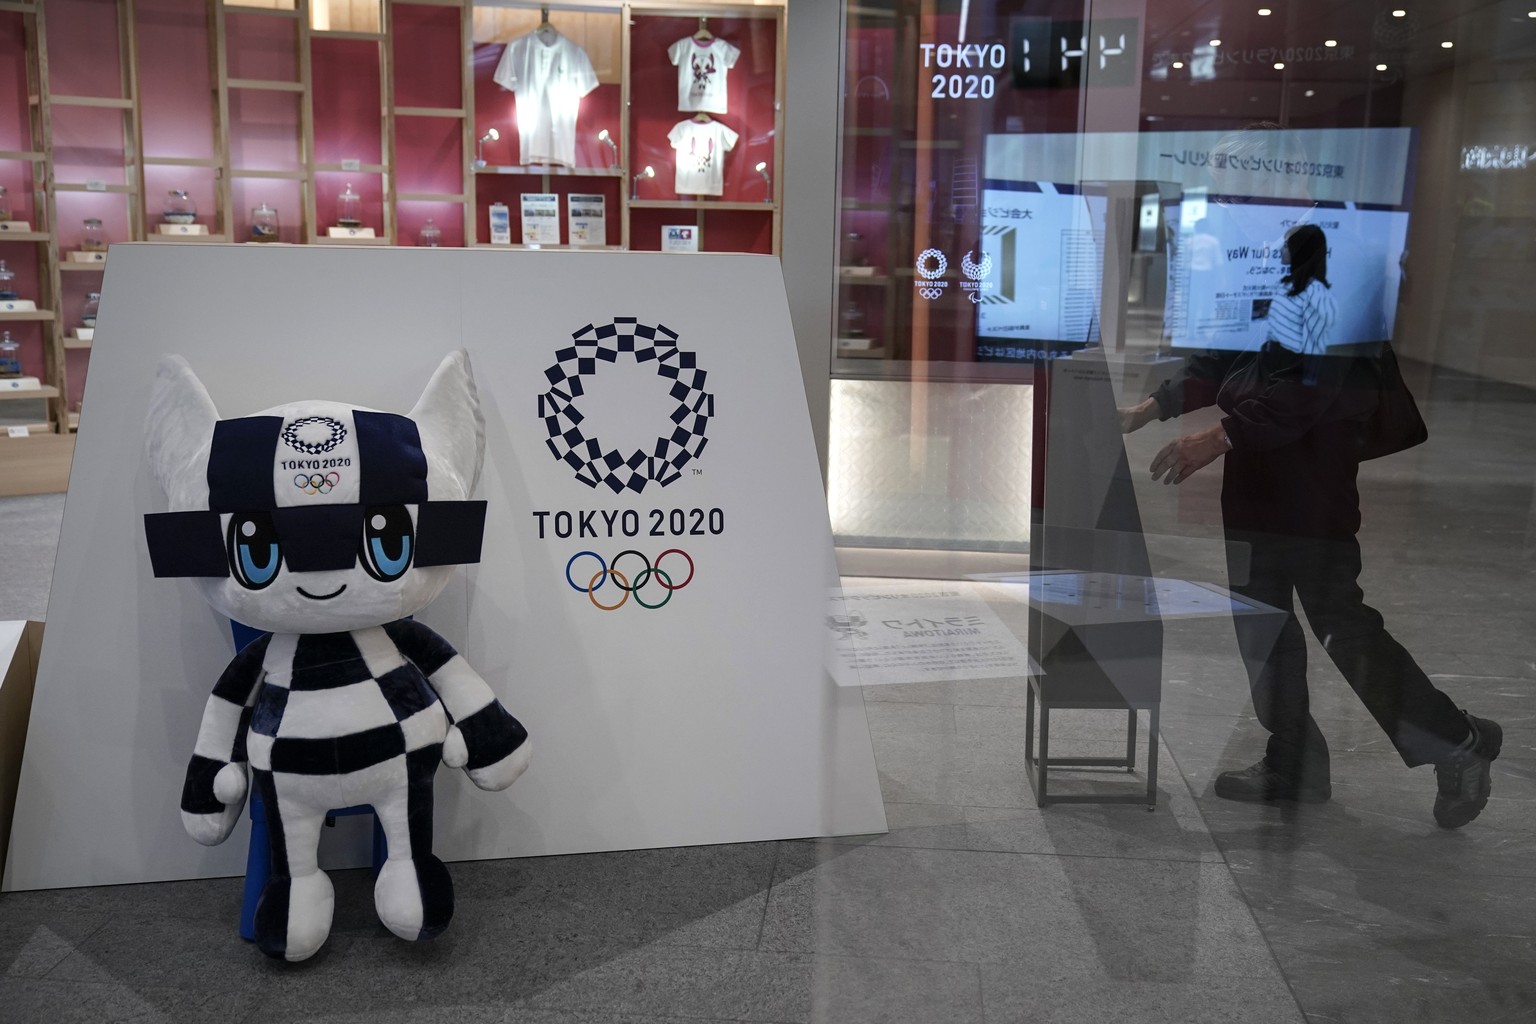 Miraitowa, a mascot for the Tokyo 2020 Summer Olympics, is displayed at an Olympic Corner Tuesday, June 11, 2019, in Tokyo. (AP Photo/Jae C. Hong)